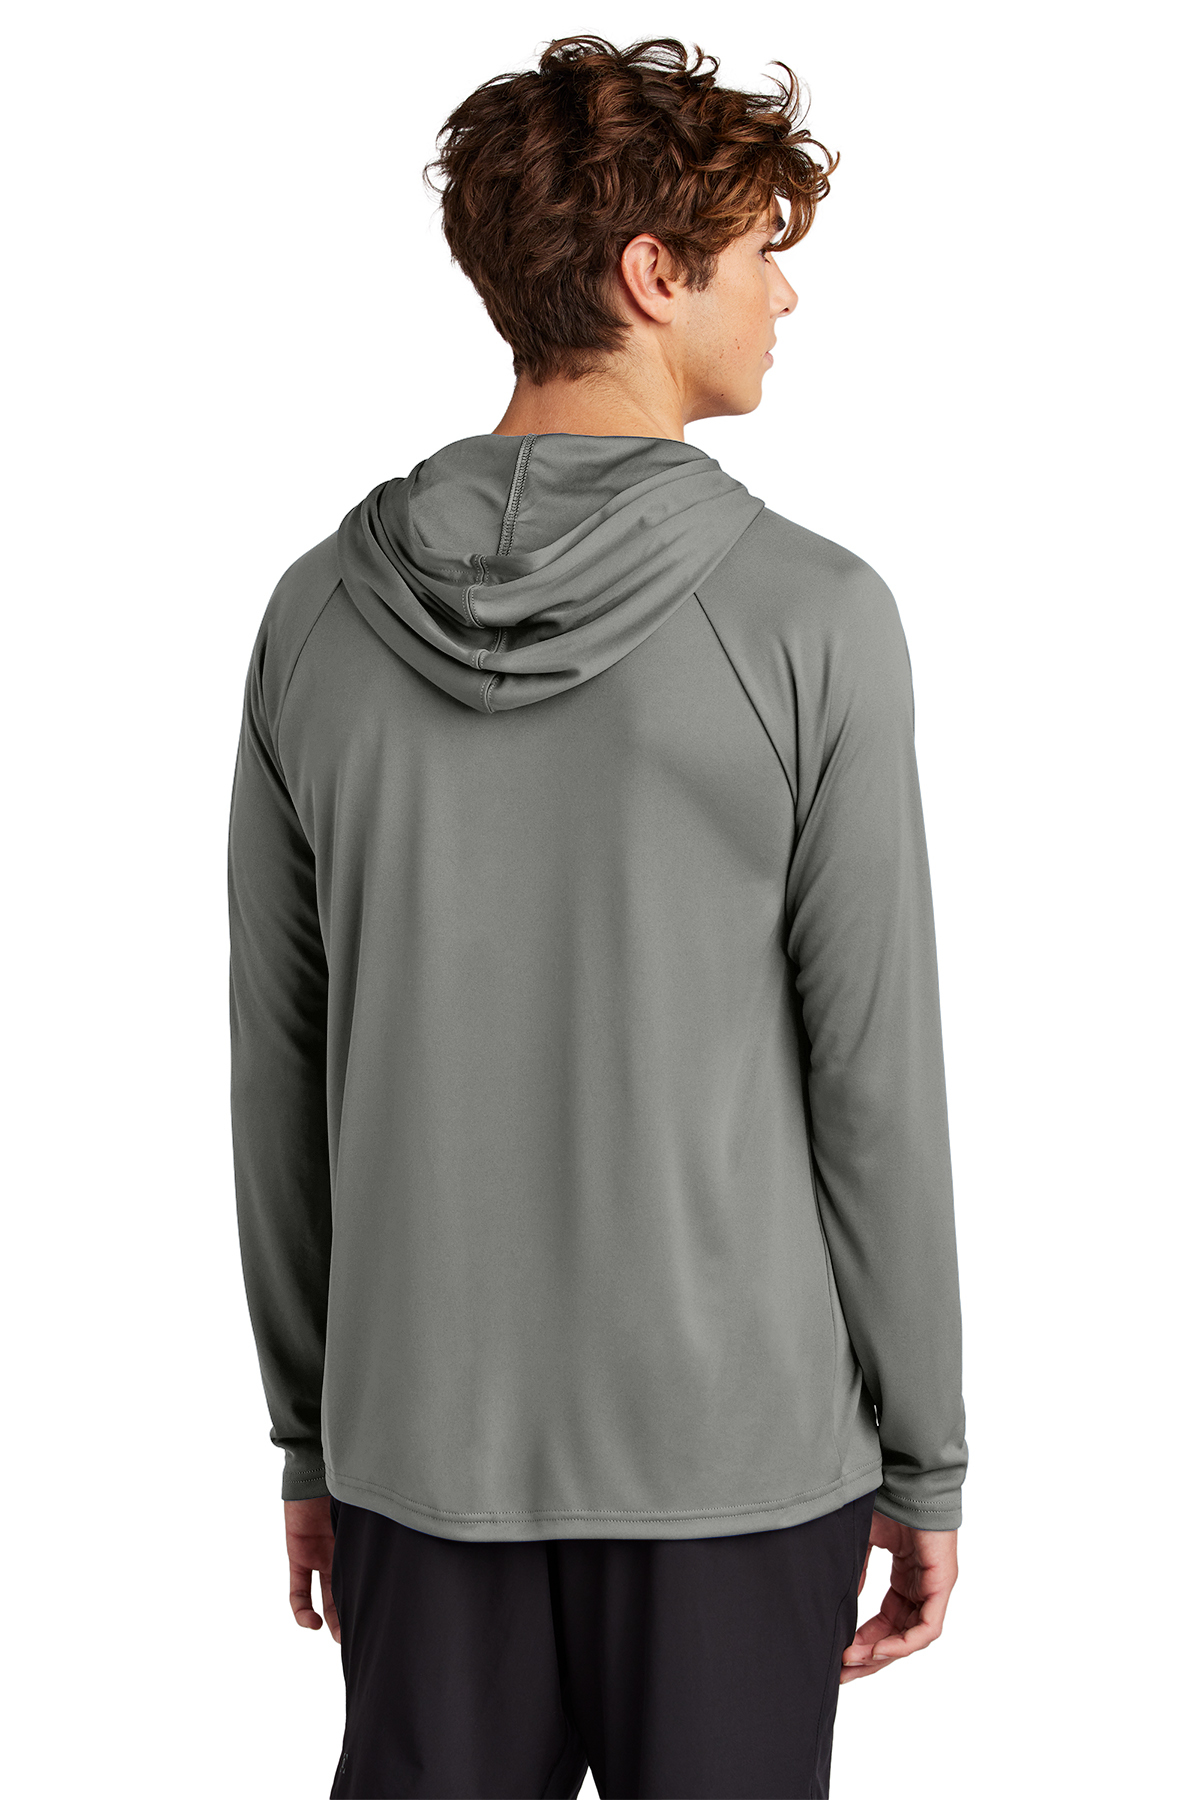 Port & Company Performance Pullover Hooded Tee | Product | Port & Company